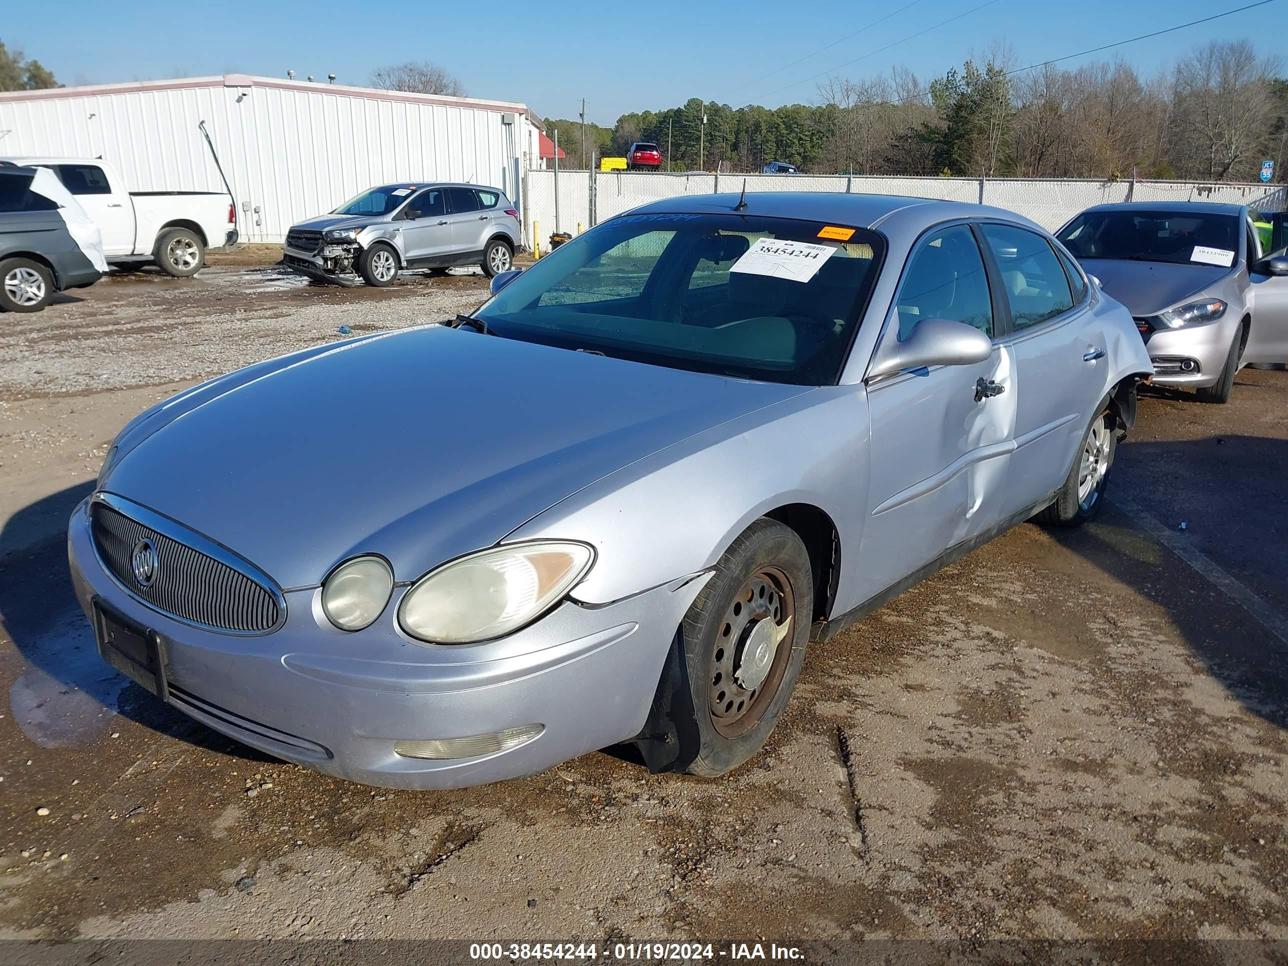 2G4WC532951346793  - BUICK LACROSSE  2005 IMG - 1